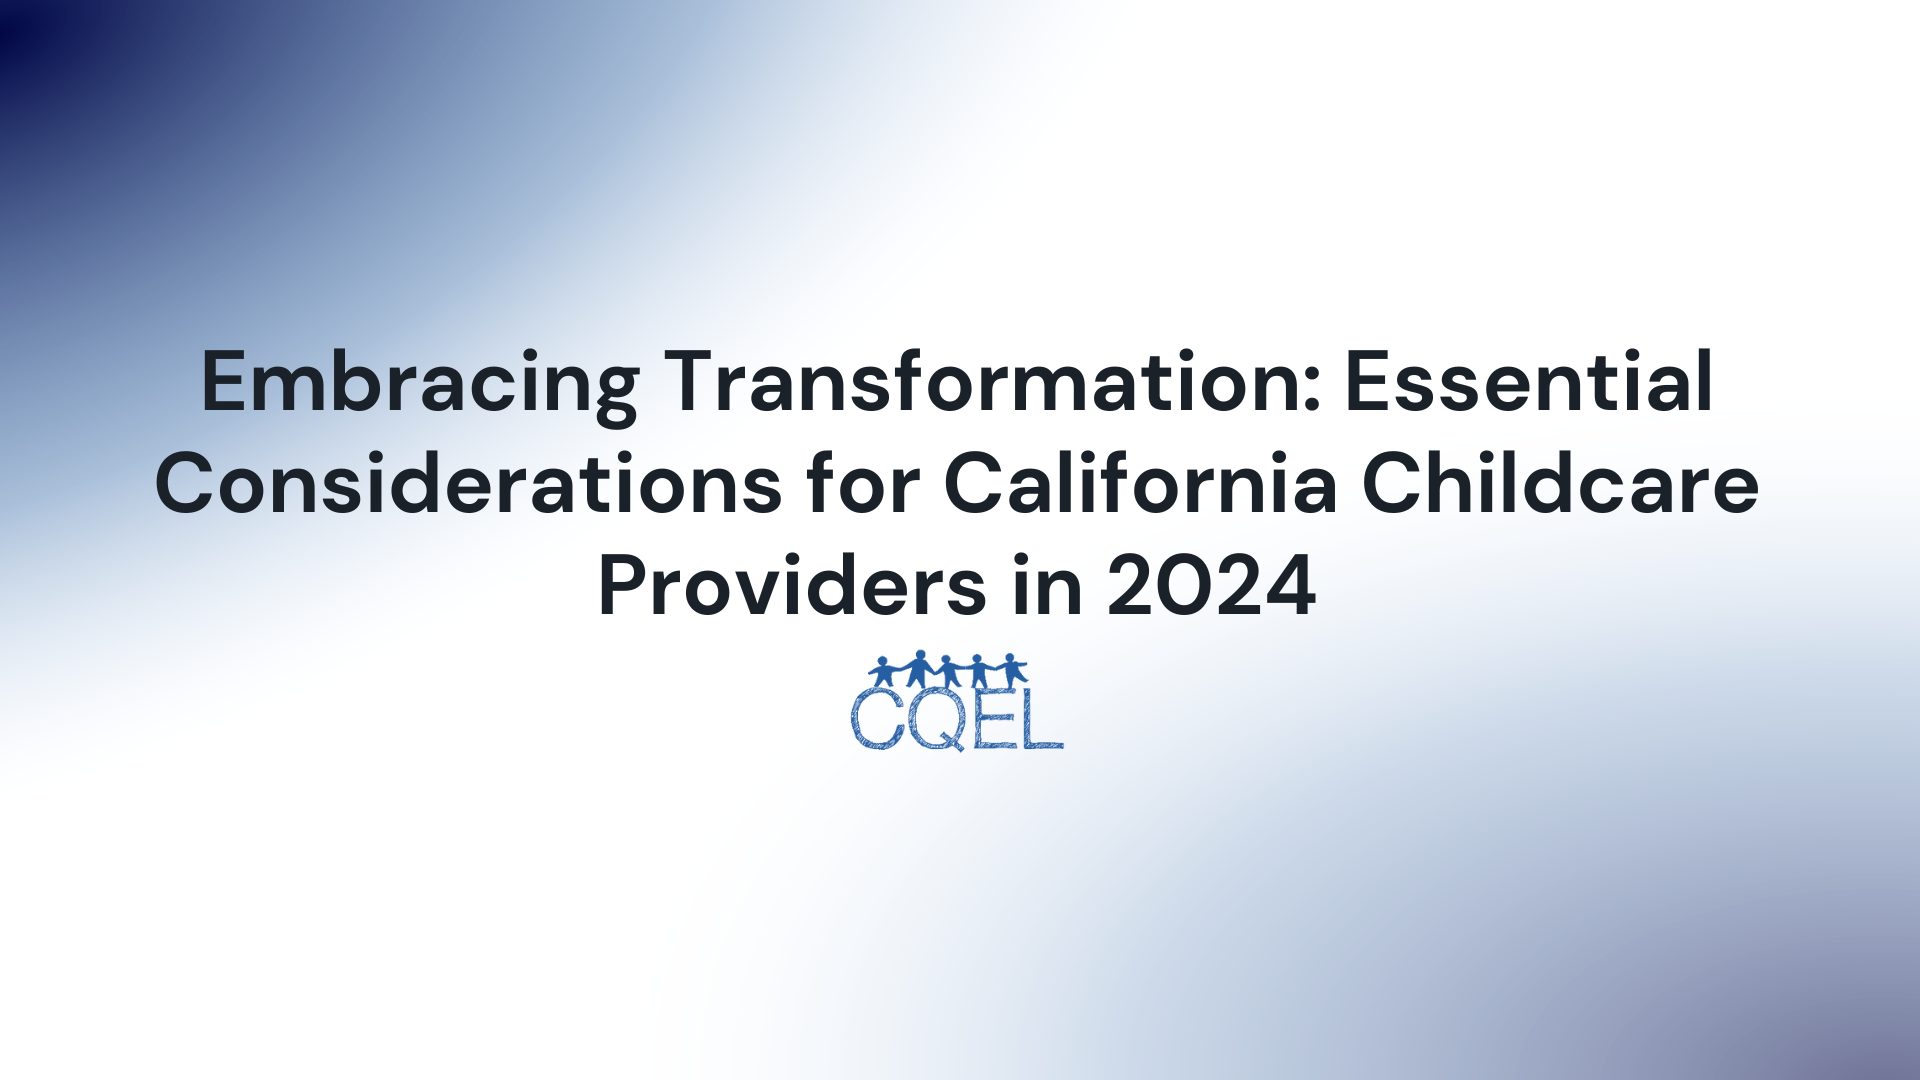 Embracing Transformation: Essential Considerations for California Childcare Providers in 2024